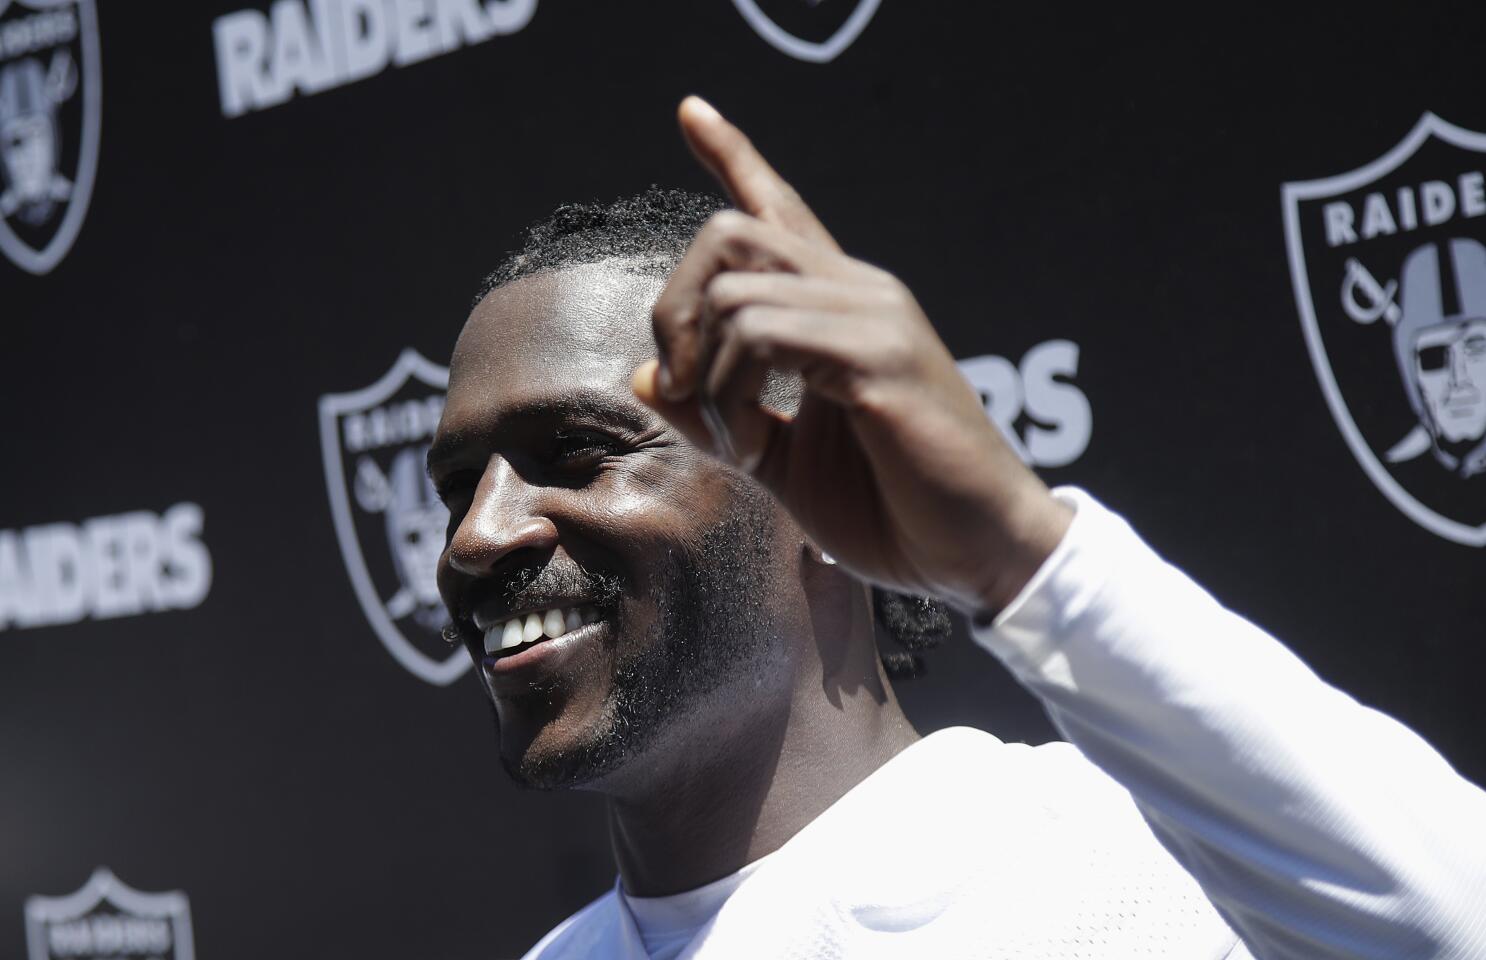 Antonio Brown's helmet argument mostly silly, but there is some validity -  The San Diego Union-Tribune